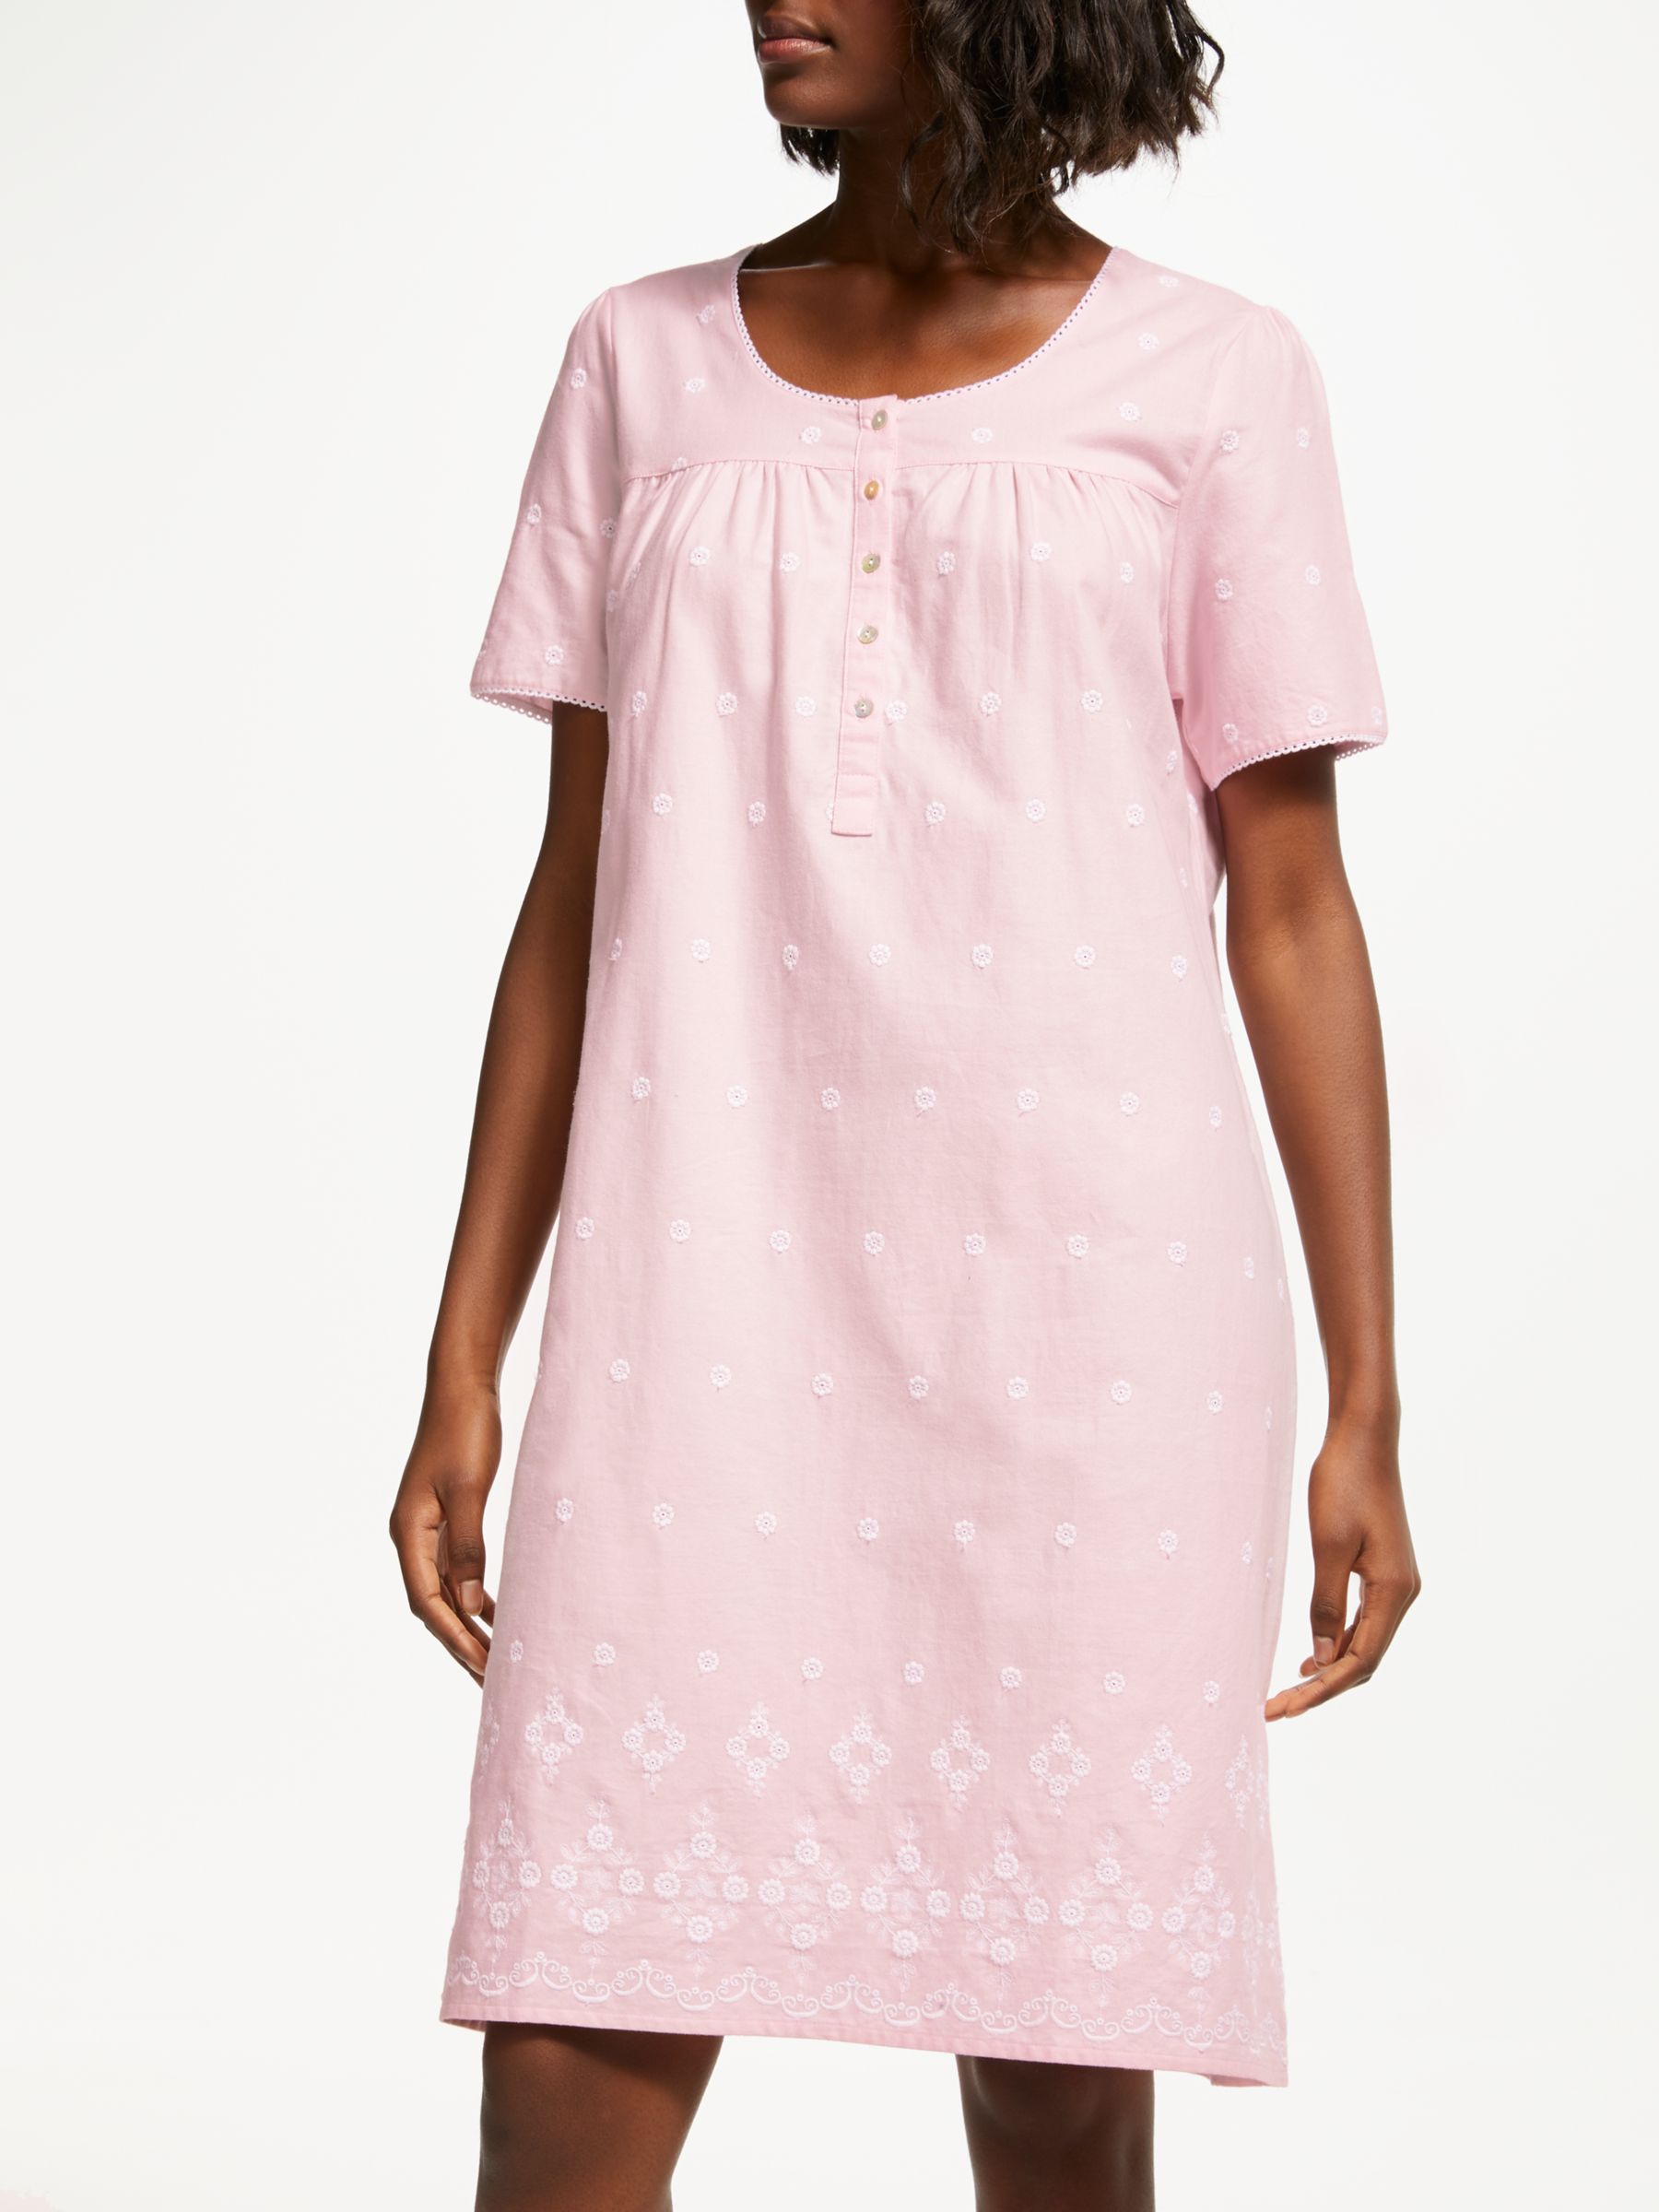 John Lewis & Partners Embroidered Cotton Nightdress, Pink